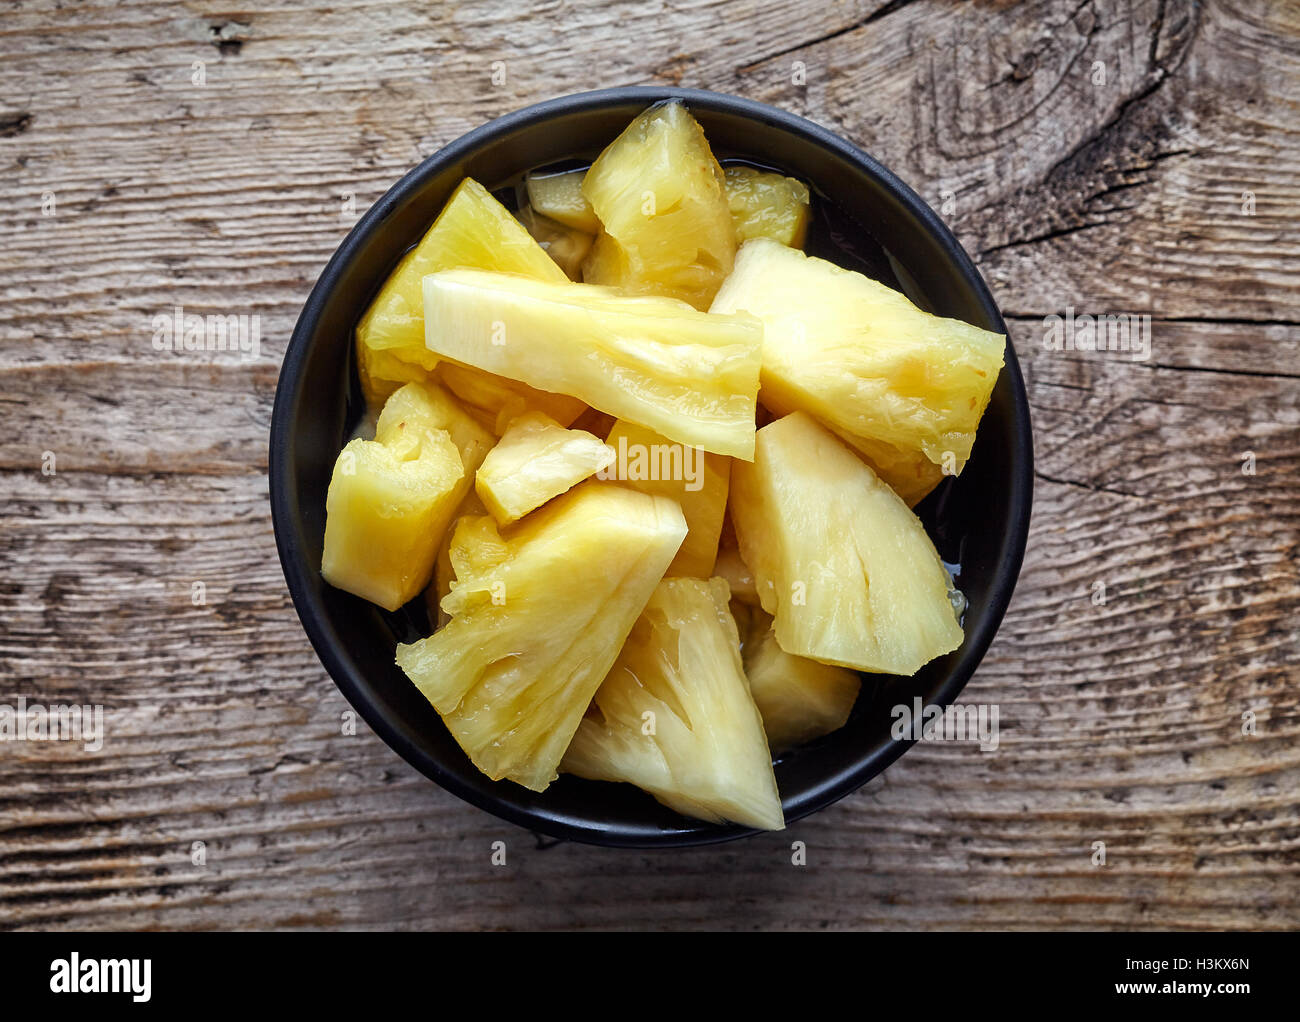 Bowl of canned pineapple chunks on wooden table, top view Stock Photo